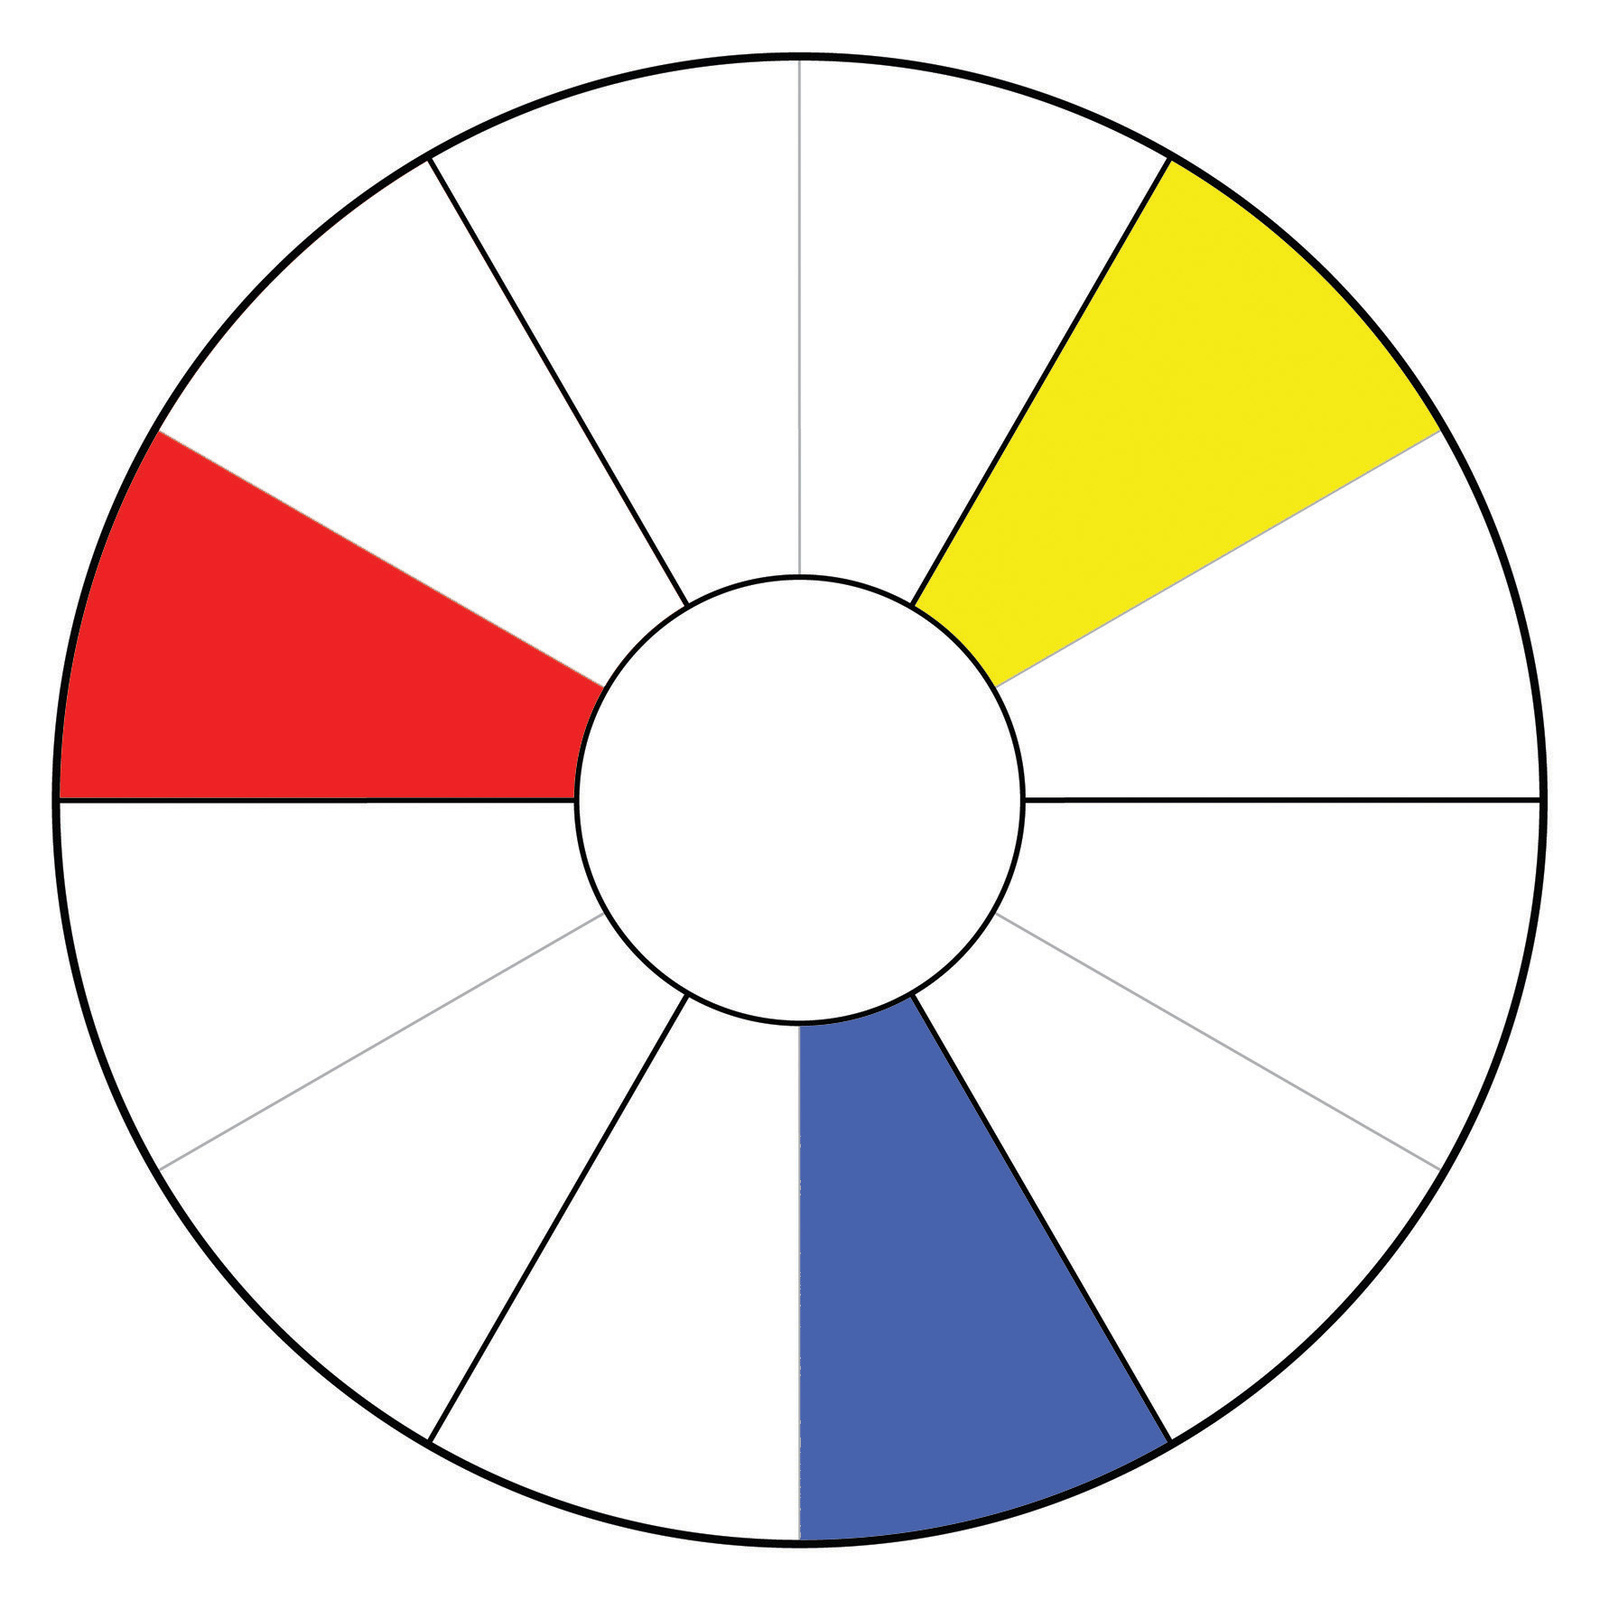 Colour Wheel Template for primary school and secondary school art students